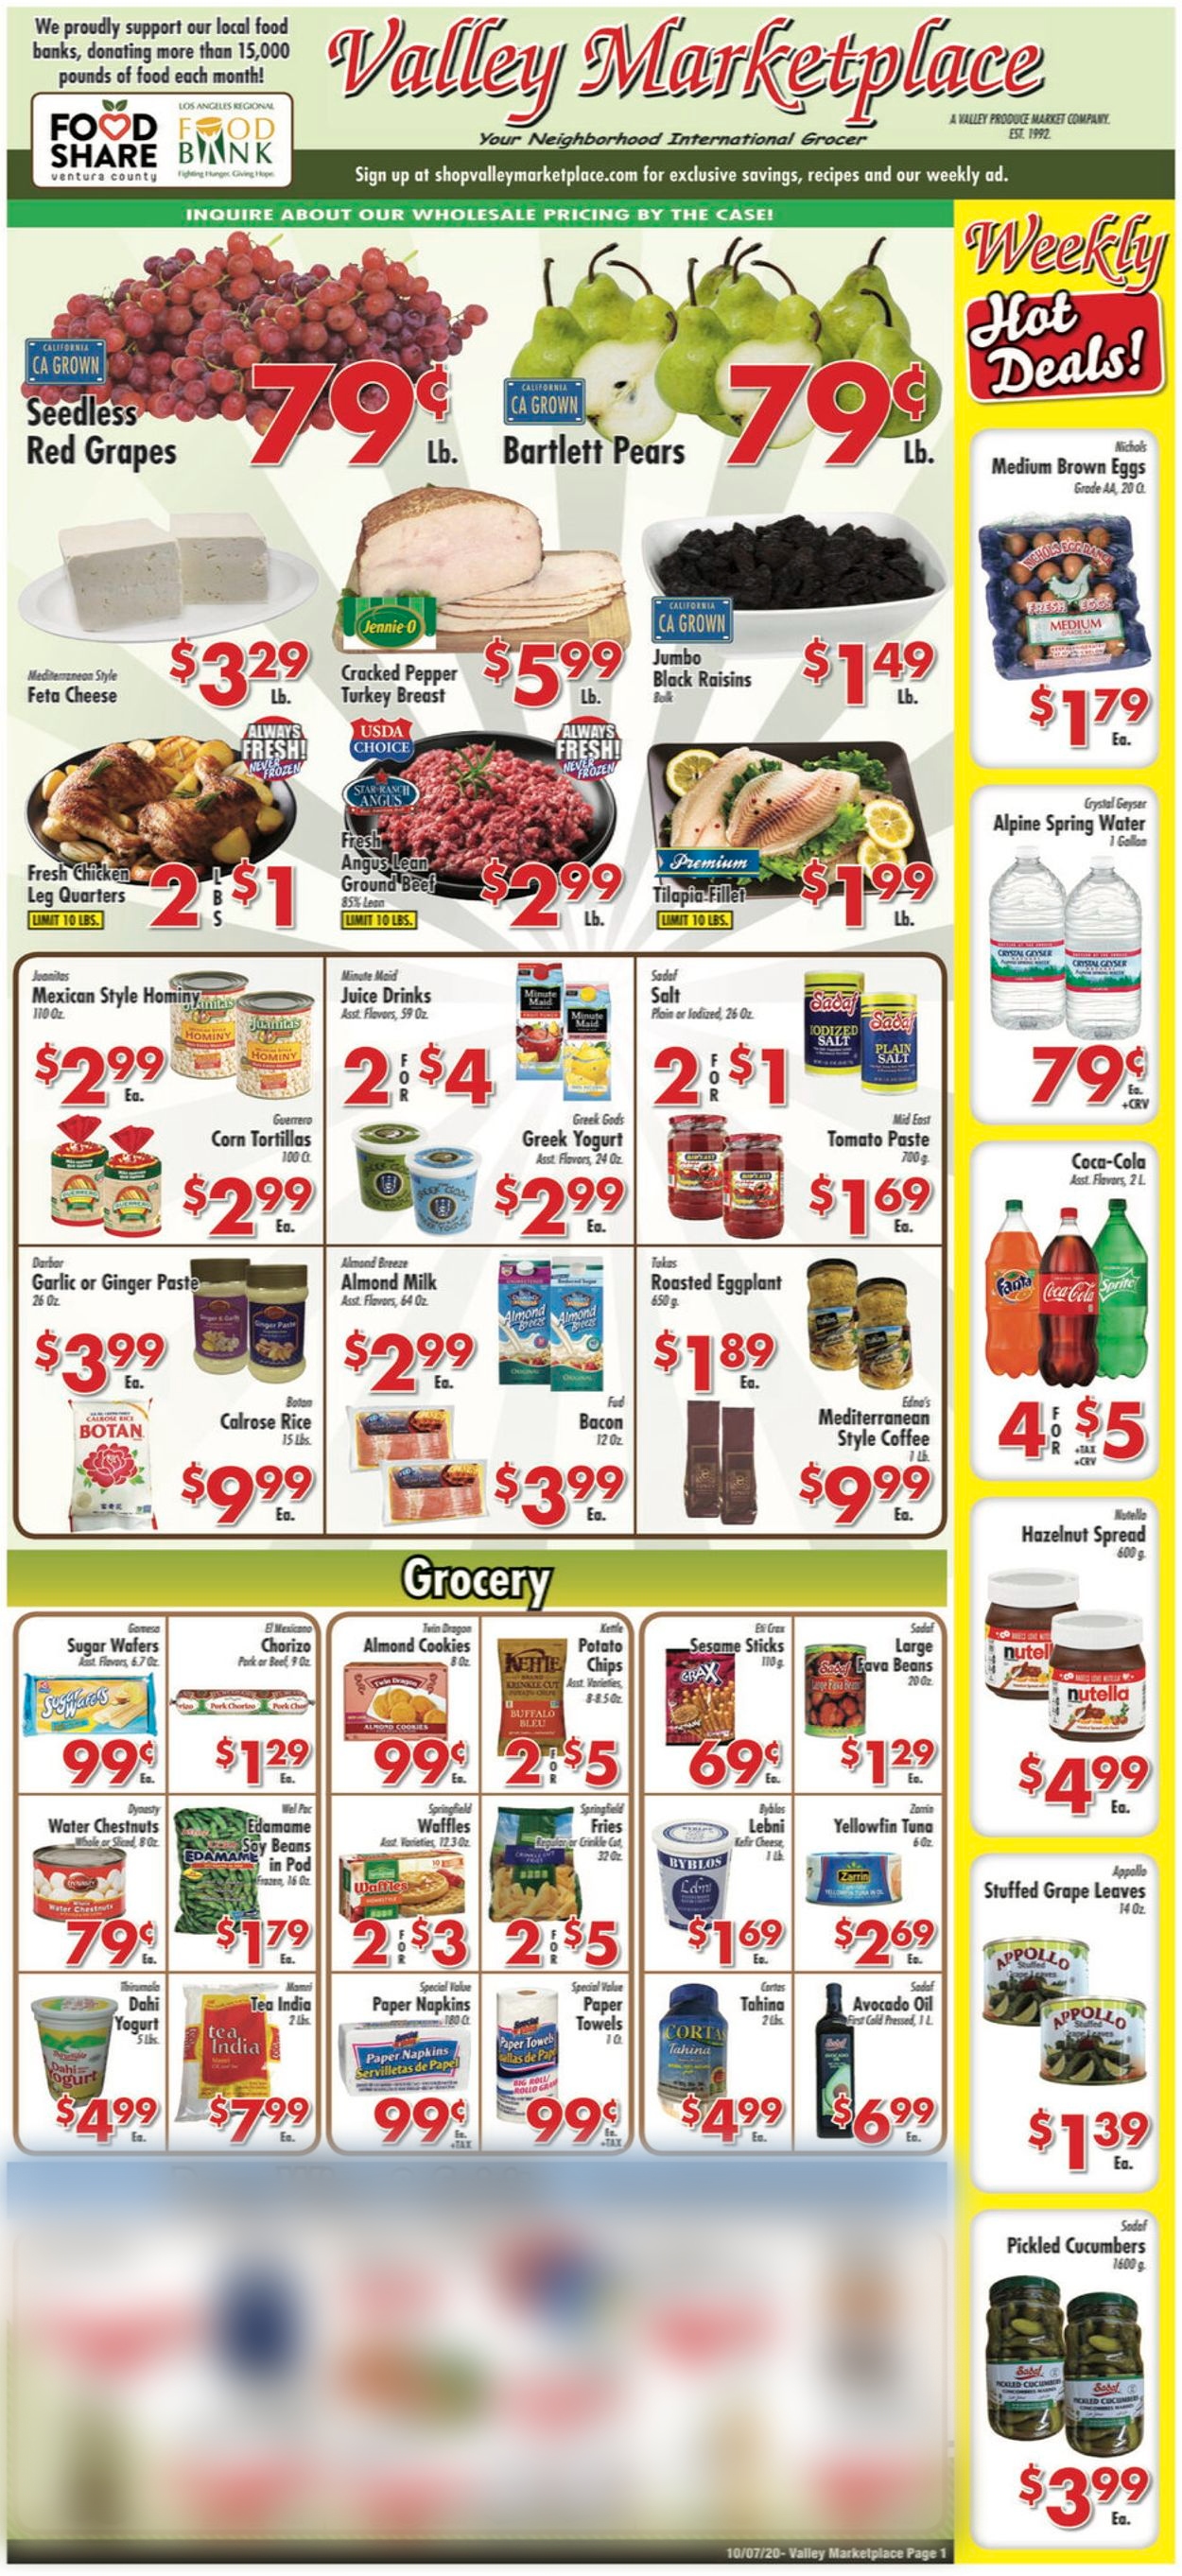 Valley Marketplace Current weekly ad 10/07 - 12/13/2020 - frequent-ads.com